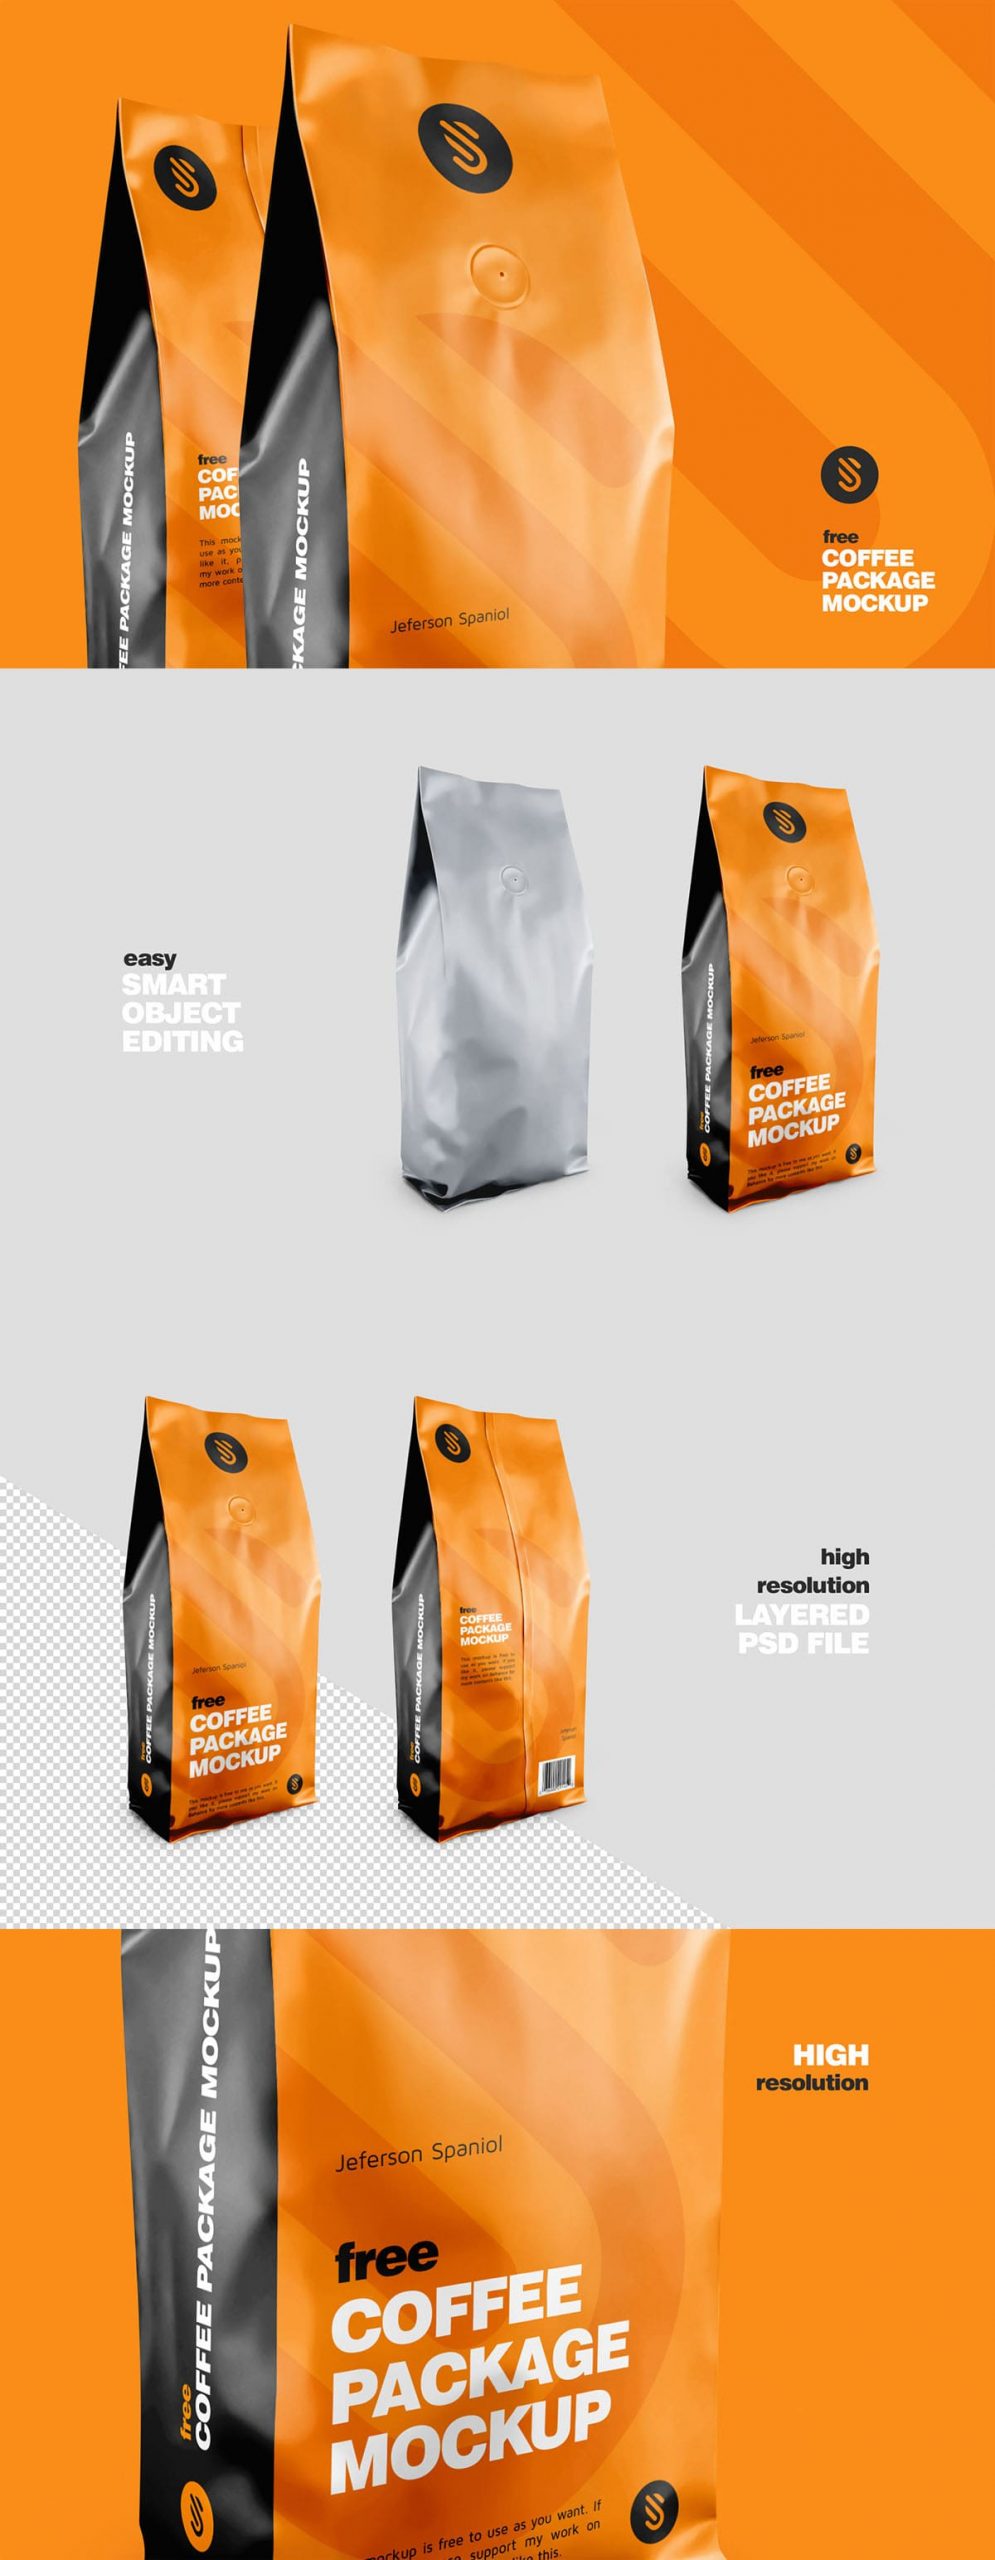 Download Free Coffee Package Mockup PSD - Find the Perfect Creative Mockups Freebies to Showcase your ...